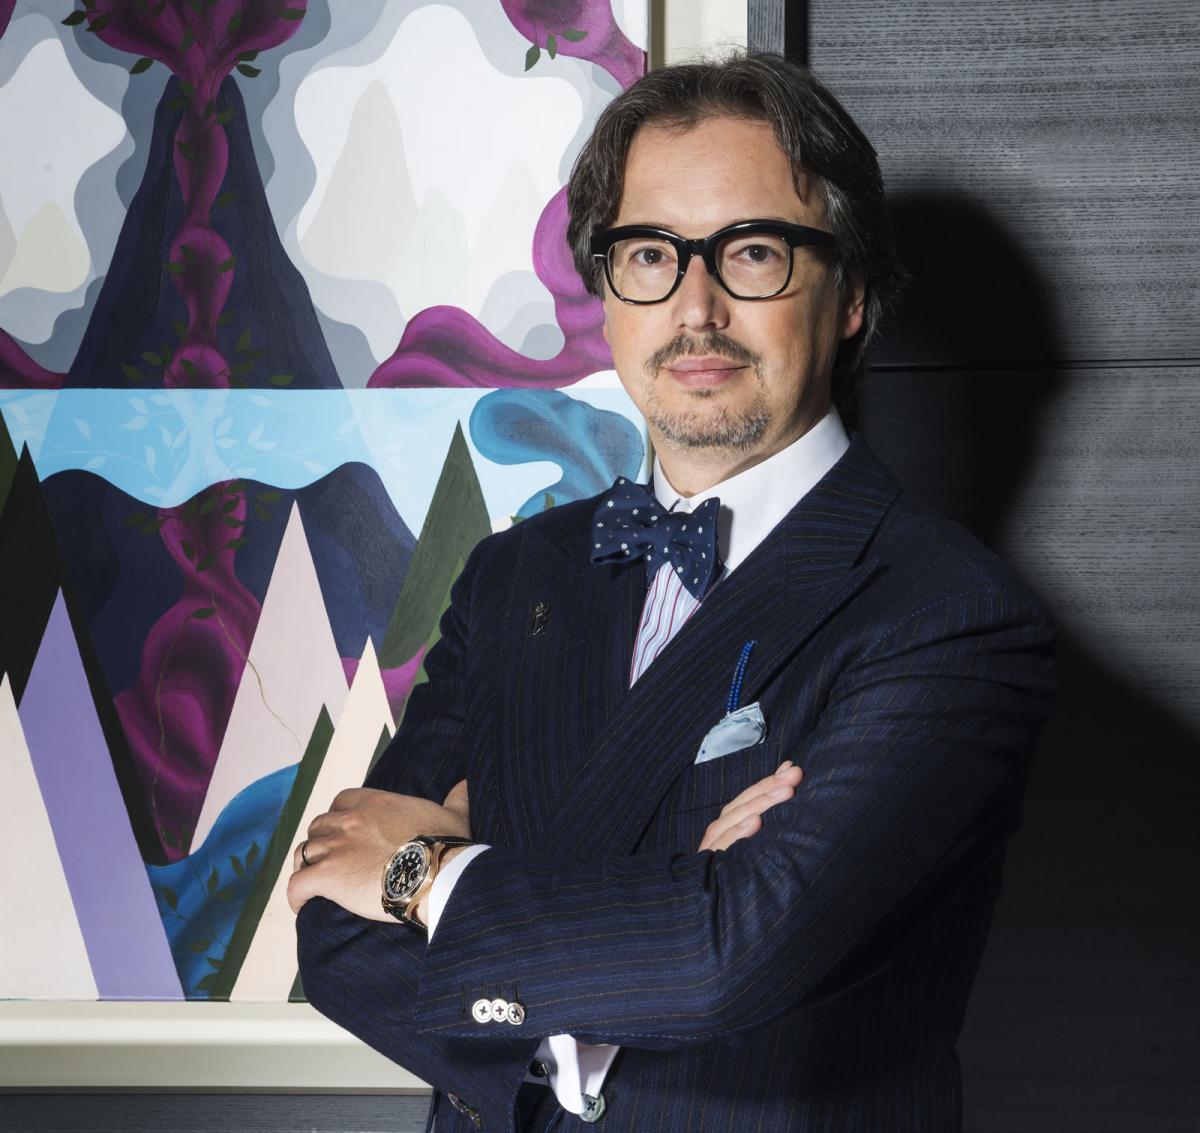 Davide Cerrato – Managing director of Montblanc watches speaks to Luxurylaunches